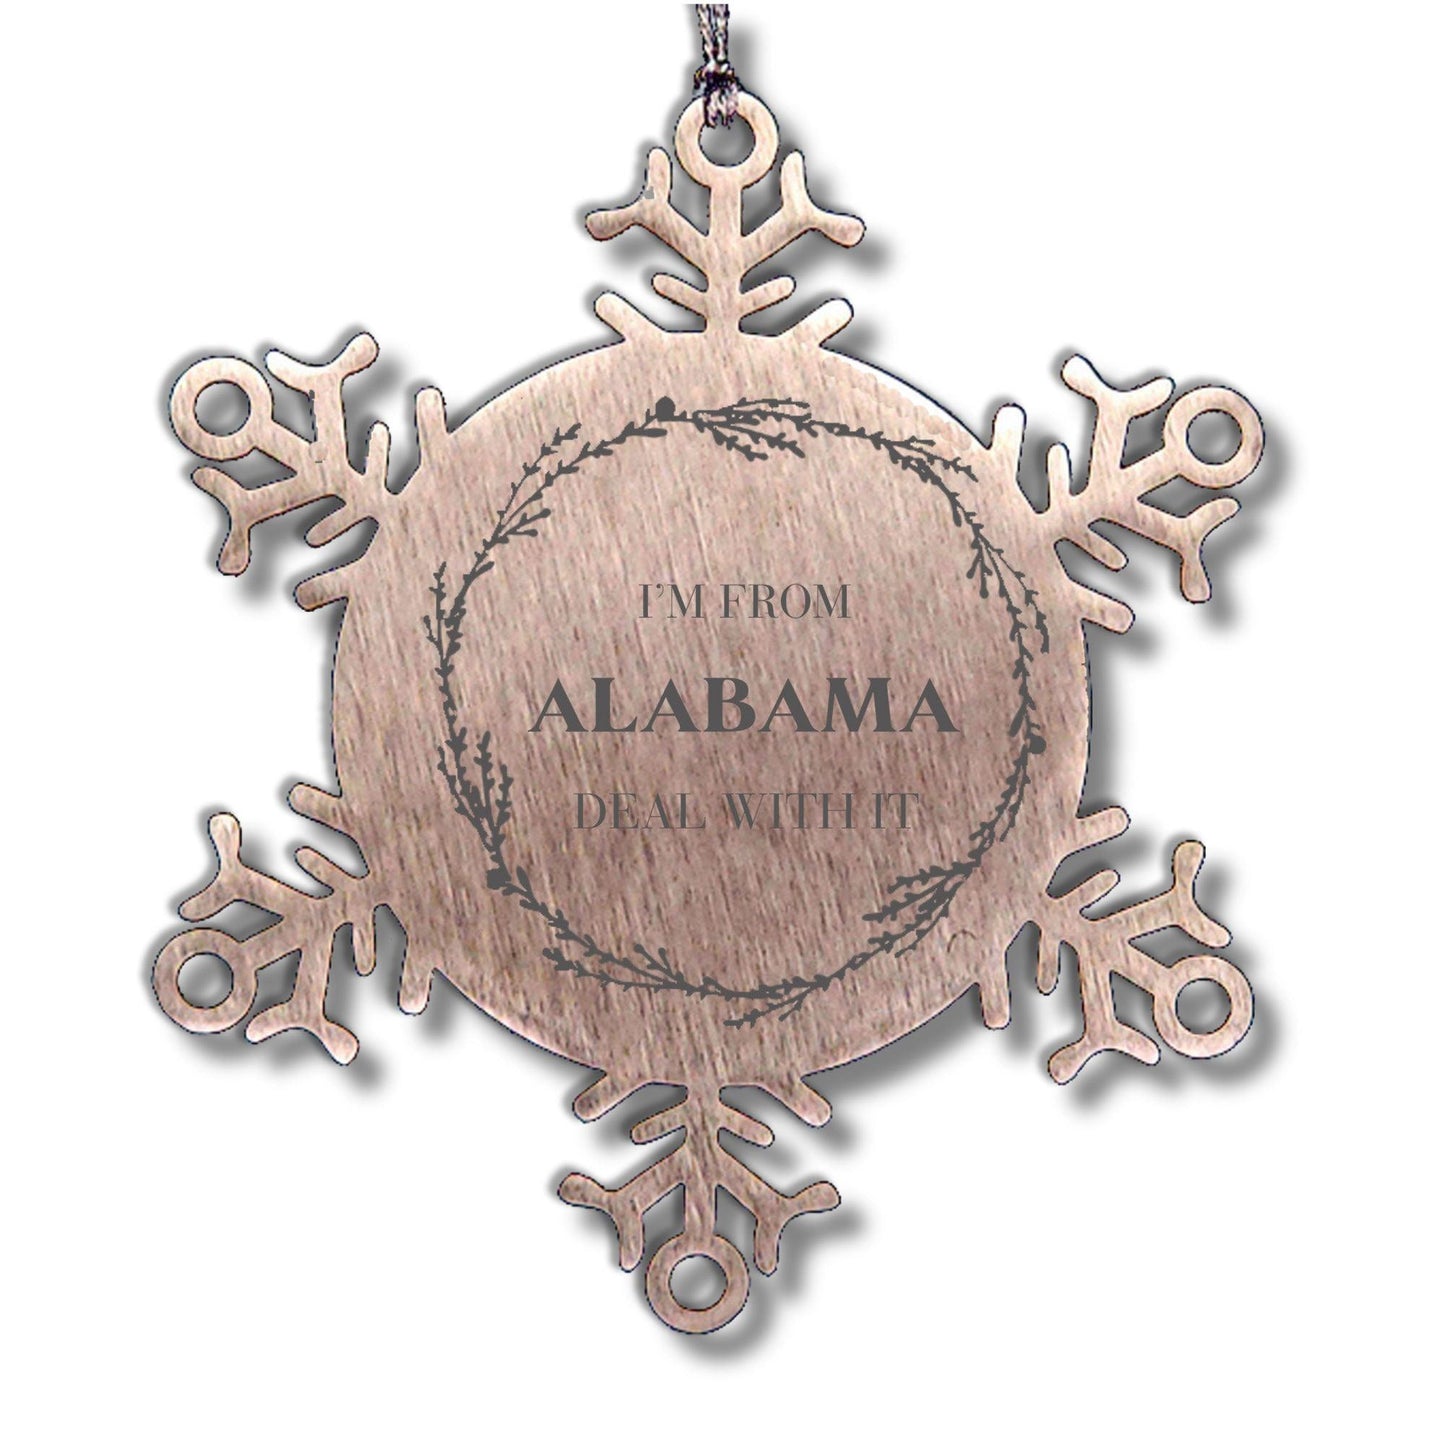 I'm from Alabama, Deal with it, Proud Alabama State Ornament Gifts, Alabama Snowflake Ornament Gift Idea, Christmas Gifts for Alabama People, Coworkers, Colleague - Mallard Moon Gift Shop